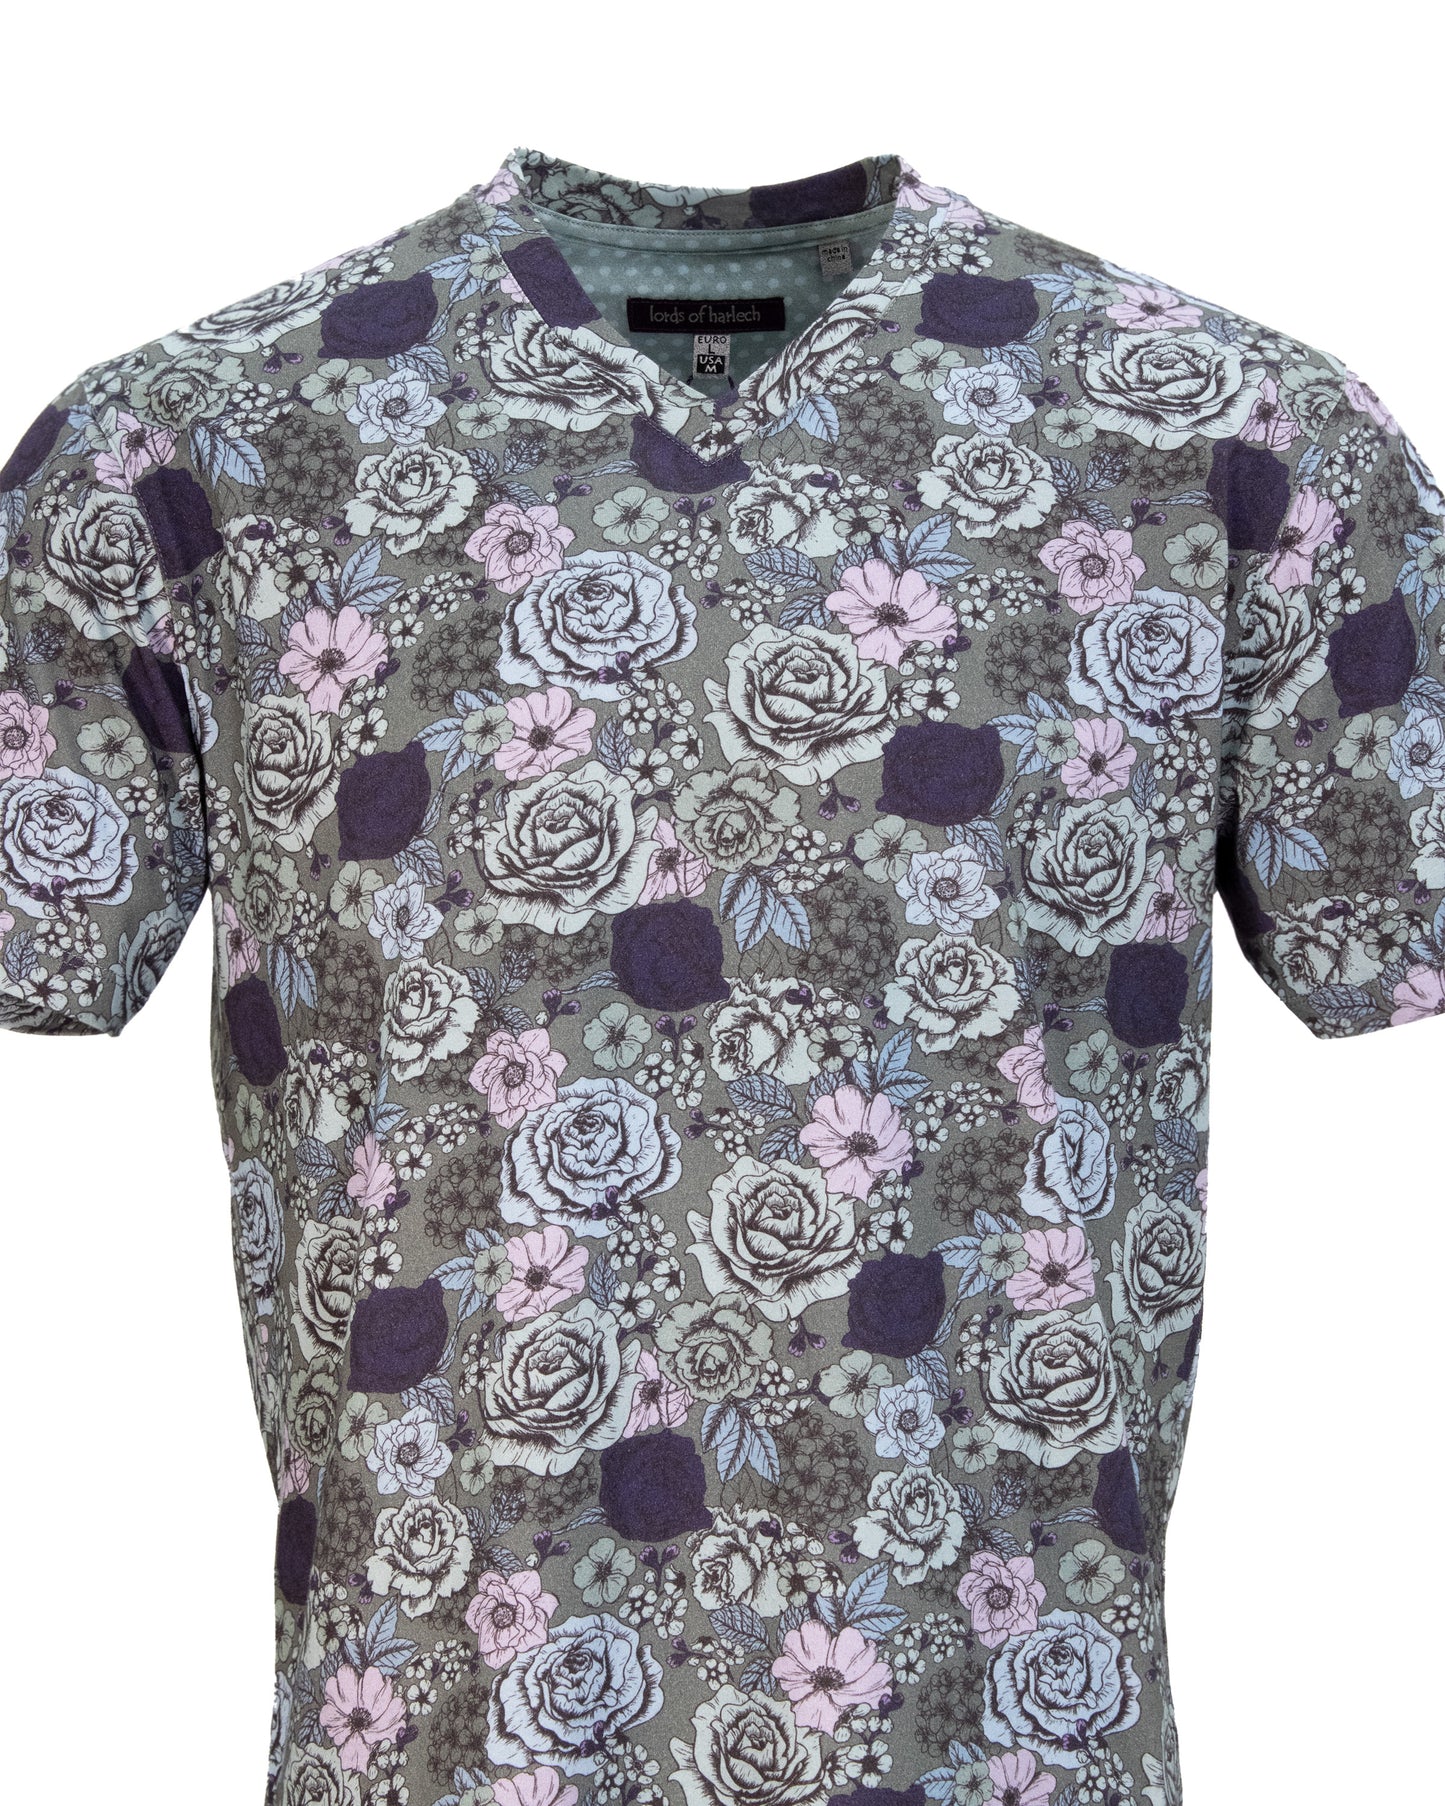 MAZE EVERYTHING ROSES V-NECK TEE IN TURF